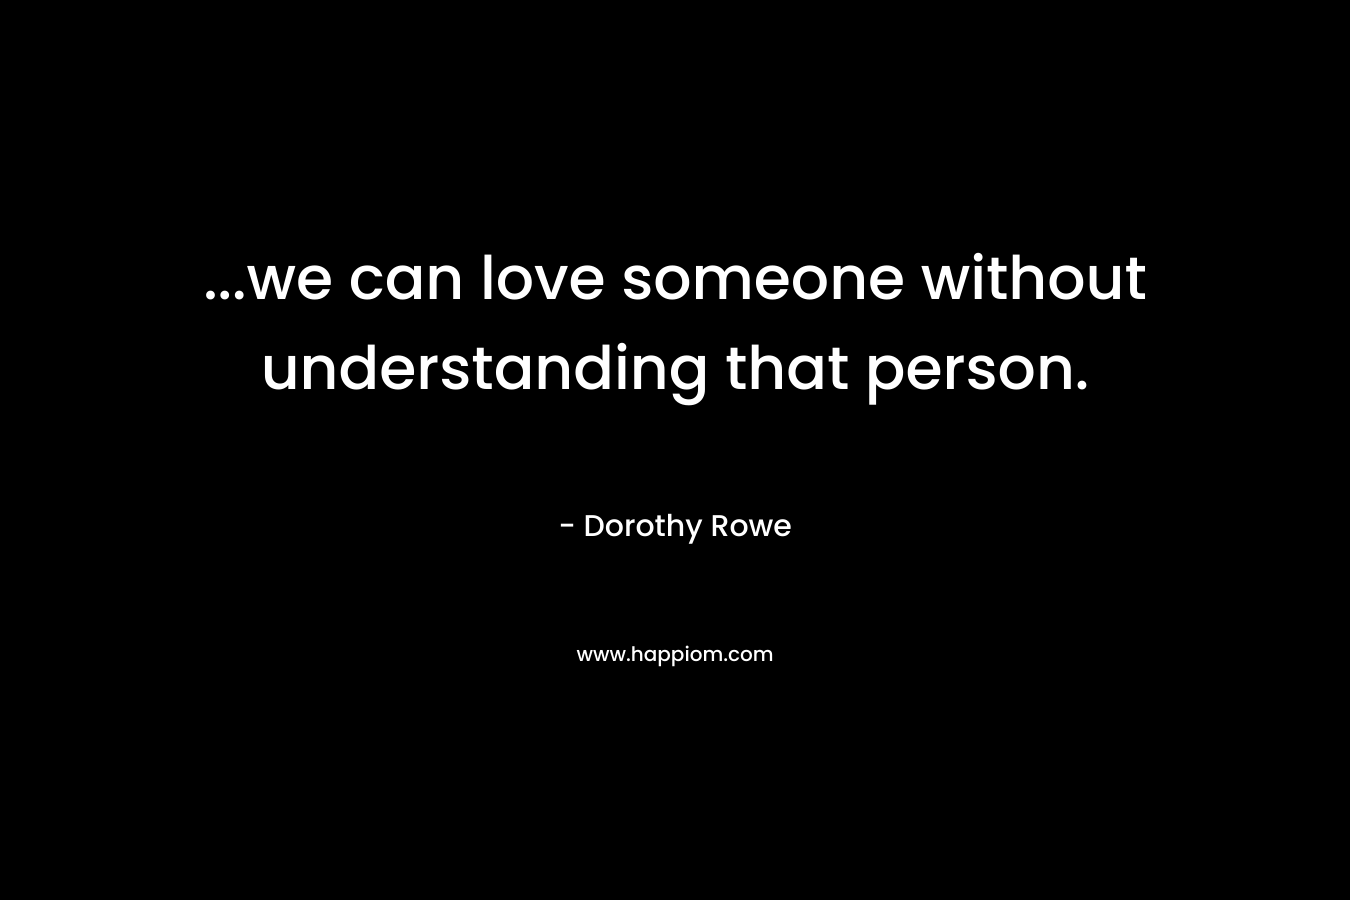 ...we can love someone without understanding that person.